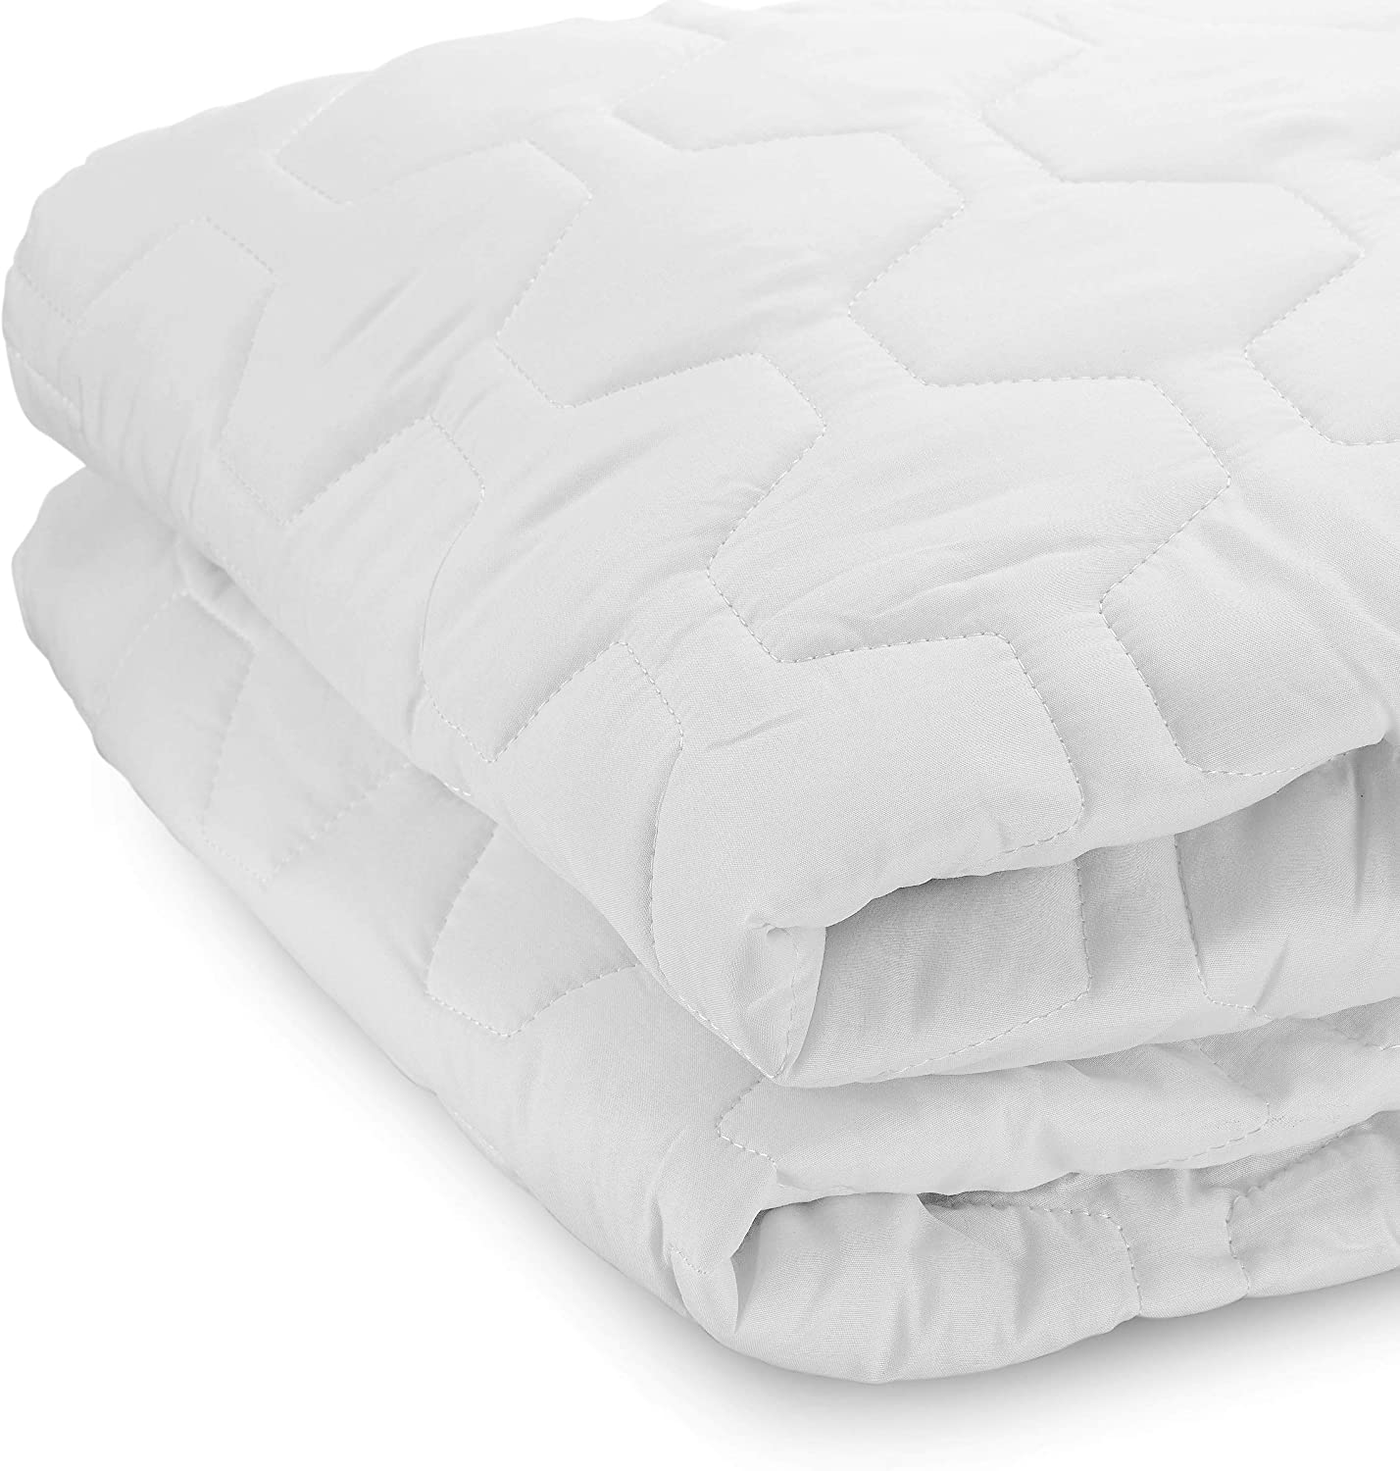 The Grand Mattress Pad Cover - Fitted Deep Pockets, Only Quality Fabrics Used & Breathable - Suitable for Cot (33"x75")